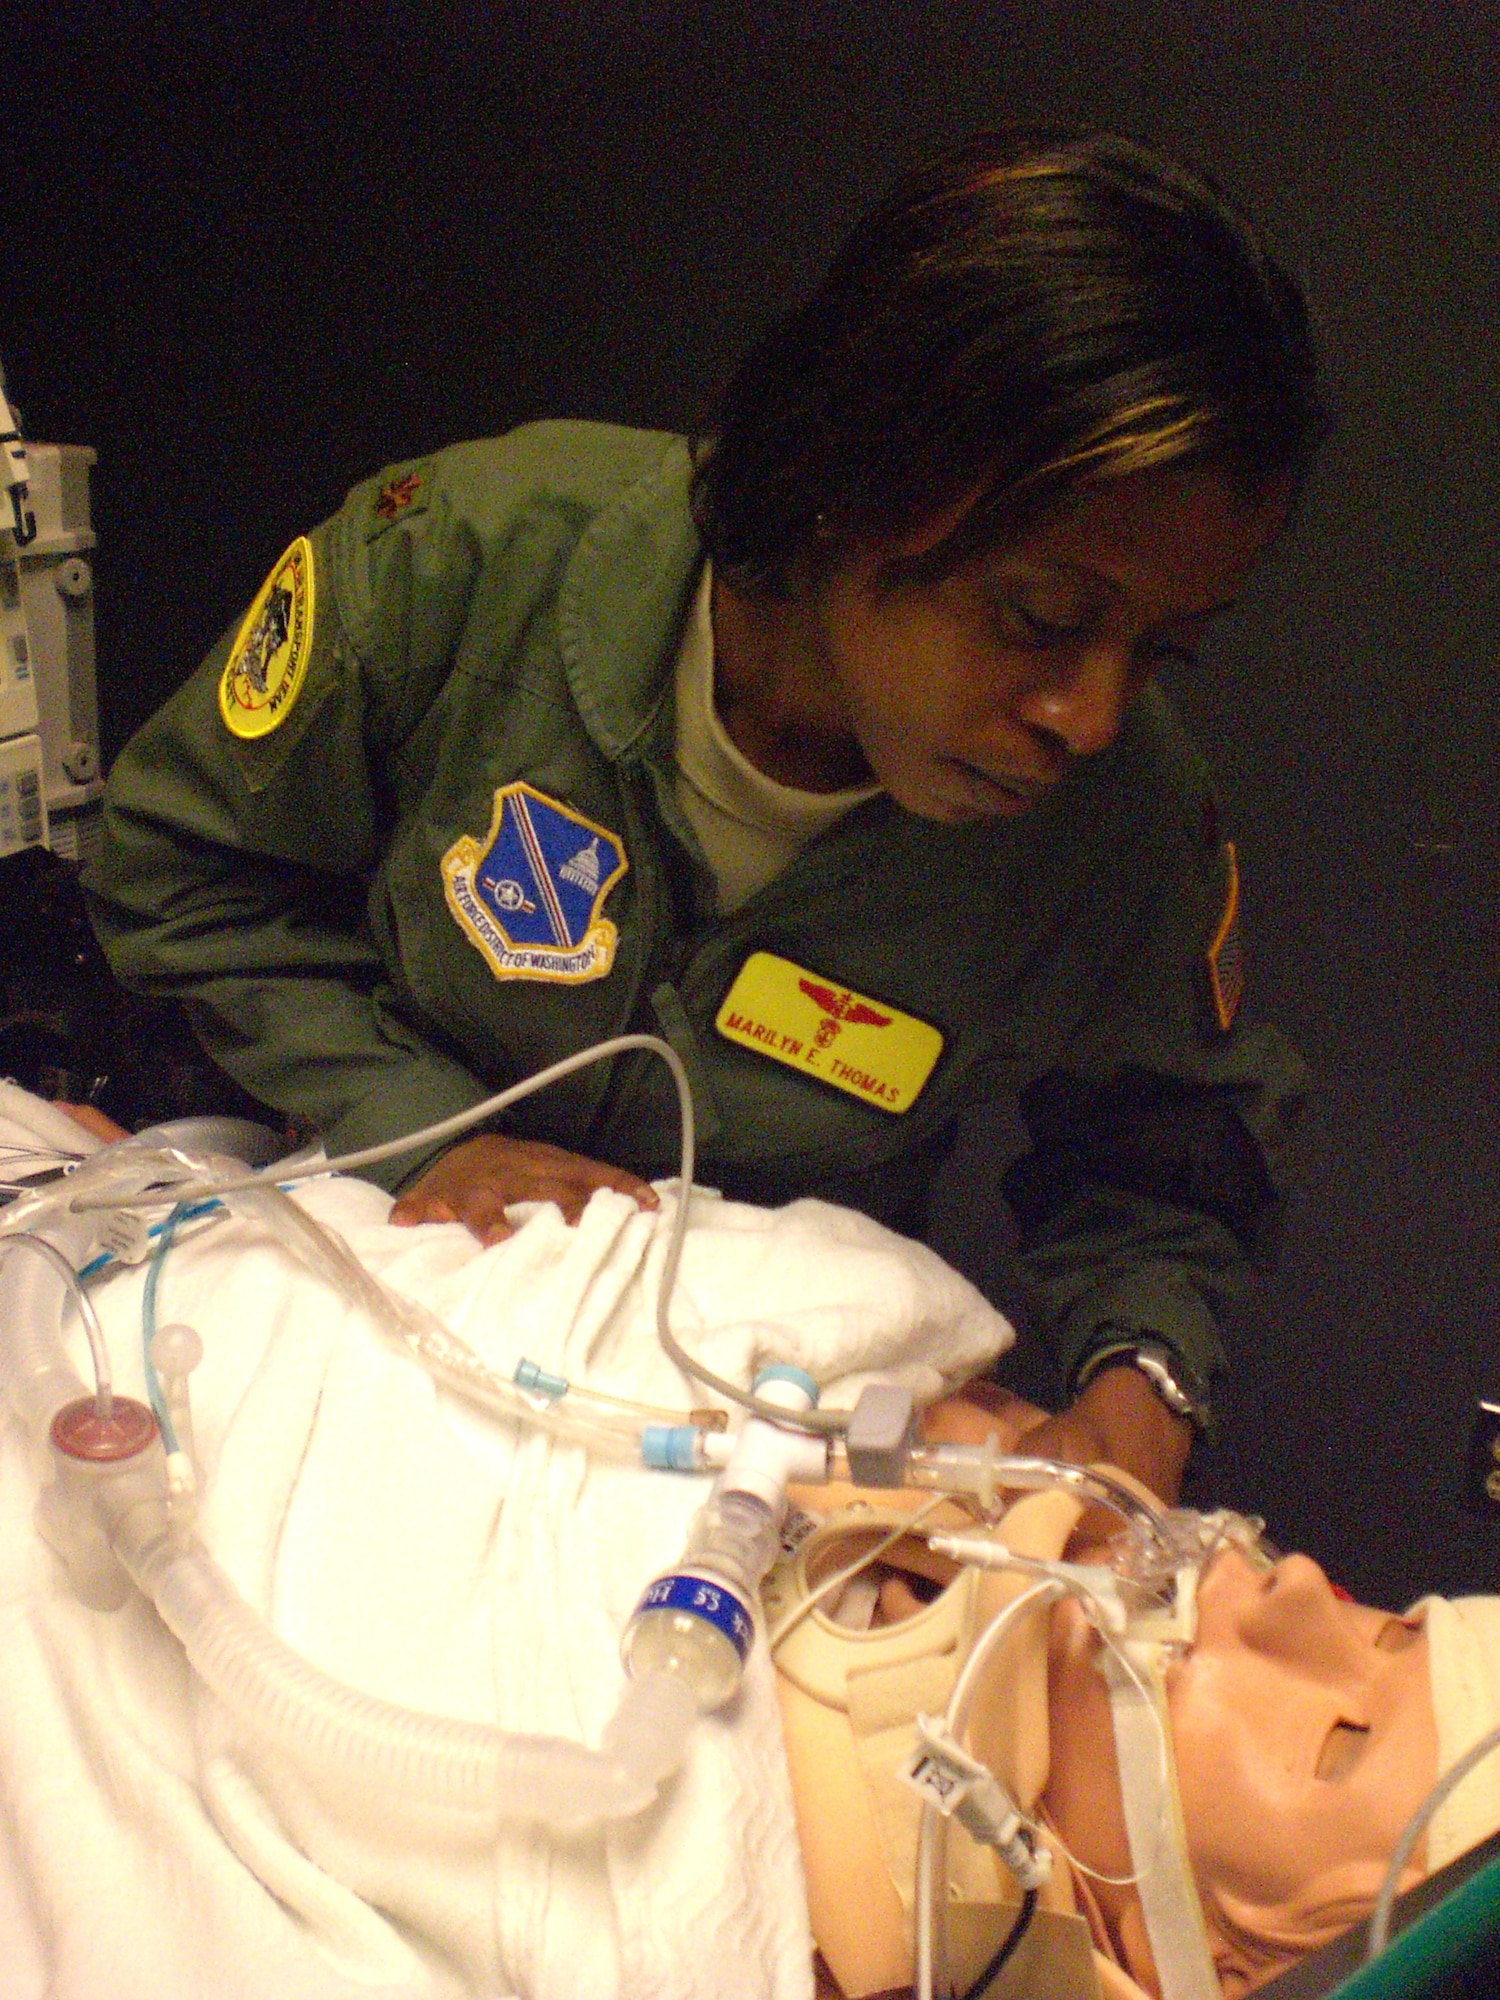 Maj. Marilyn Thomas, a critical care nurse from Andrews Air Force Base, Md., looks at one of the human patient simulator manikins inside the Air Force’s Centers for Sustainment of Trauma and Readiness Skills (CSTARS) at University Hospital Cincinnati. Maj. Thomas, already a flight nurse for aeromedical evacuation missions, is training to become a critical care air transport team (CCATT) member. CSTARS Cincinnati trains CCATT members and evaluates their readiness to fly missions downrange. (U.S. Air Force photo/Derek Kaufman)